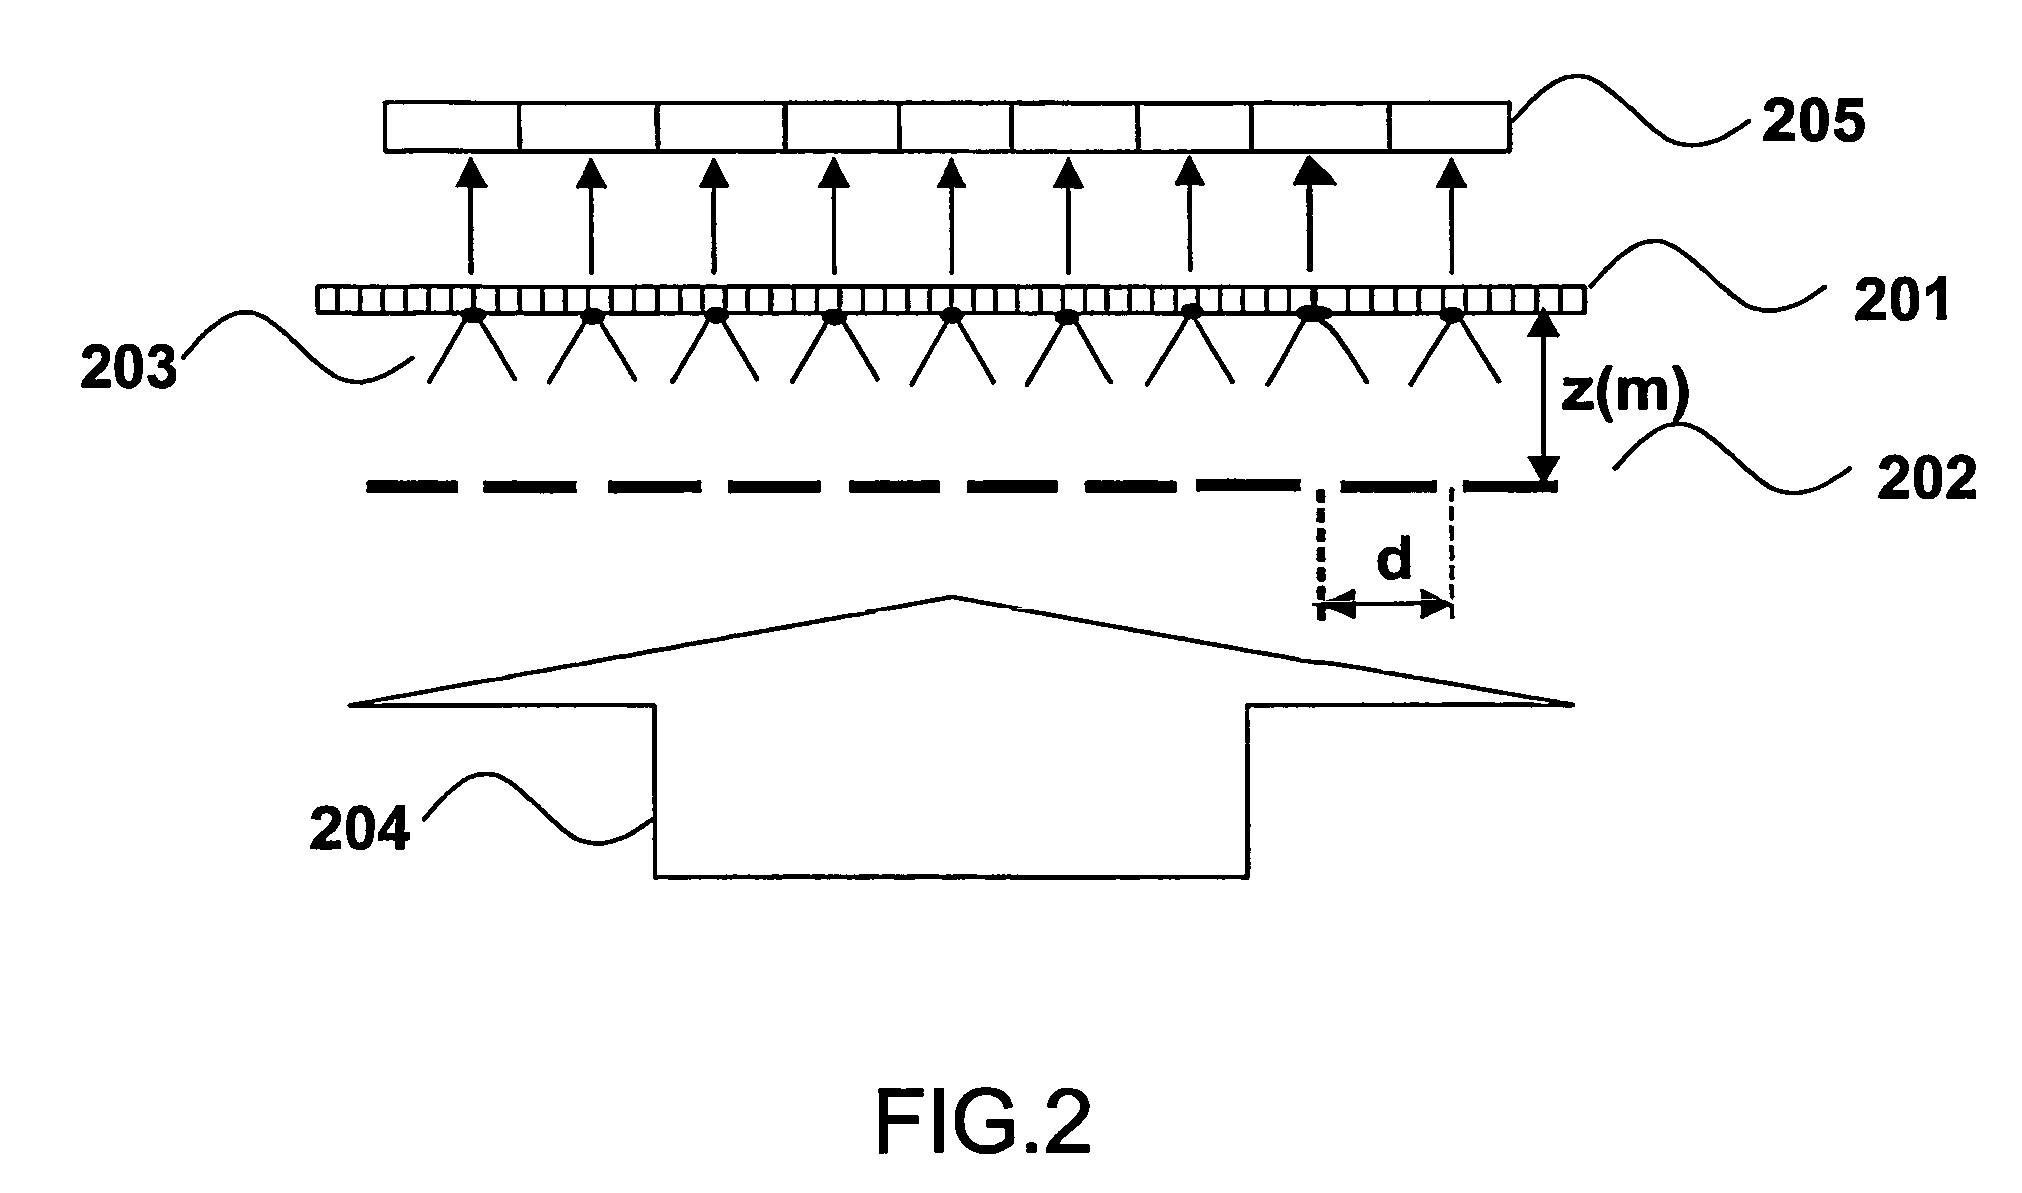 System for reading data stored on an information carrier